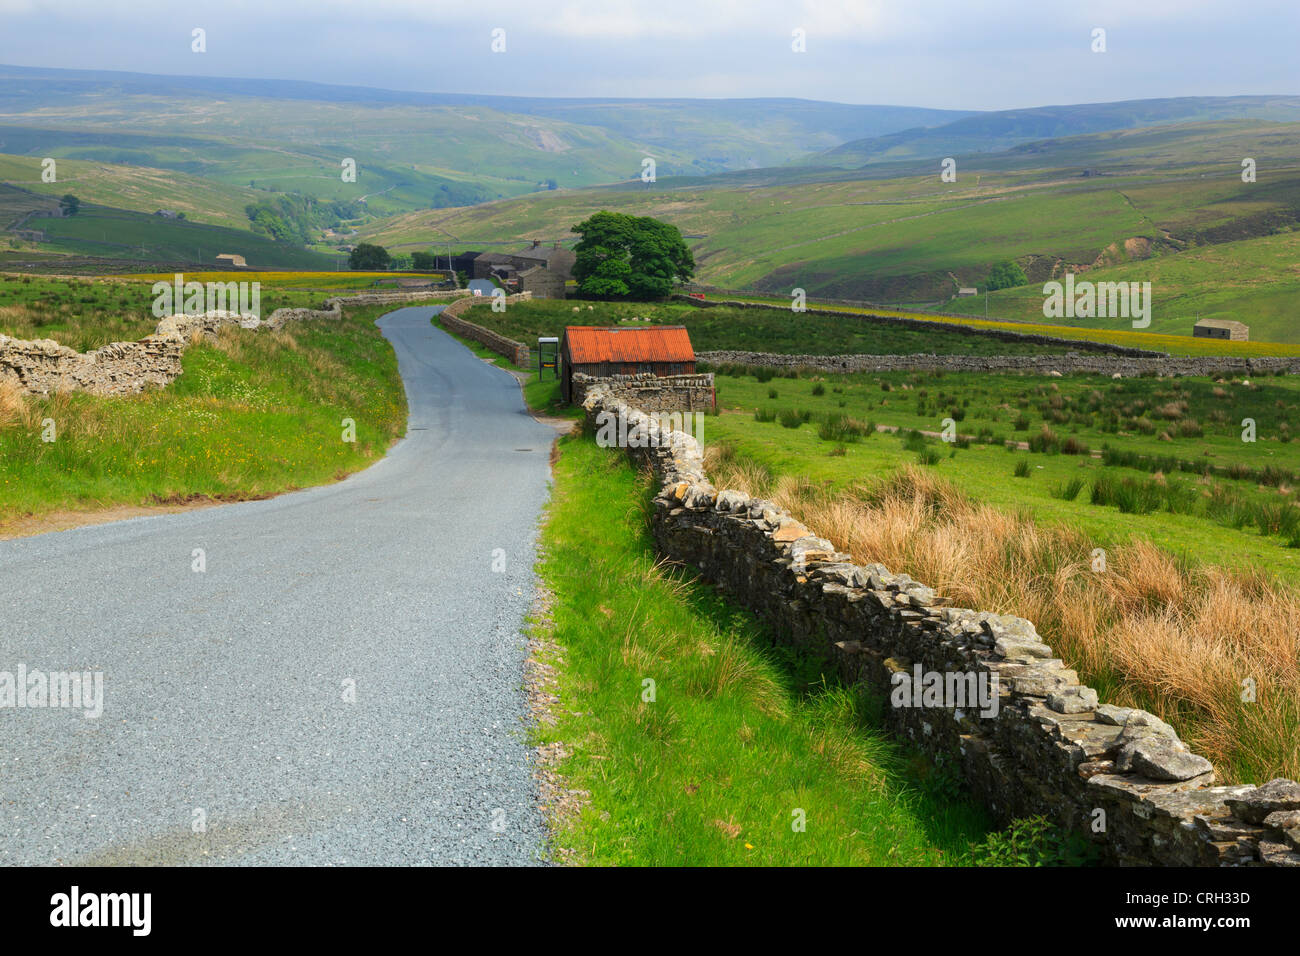 Swaledale, North Yorkshire. The B6270 meanders through well known but remote valley in the Yorkshire Dales. Stock Photo